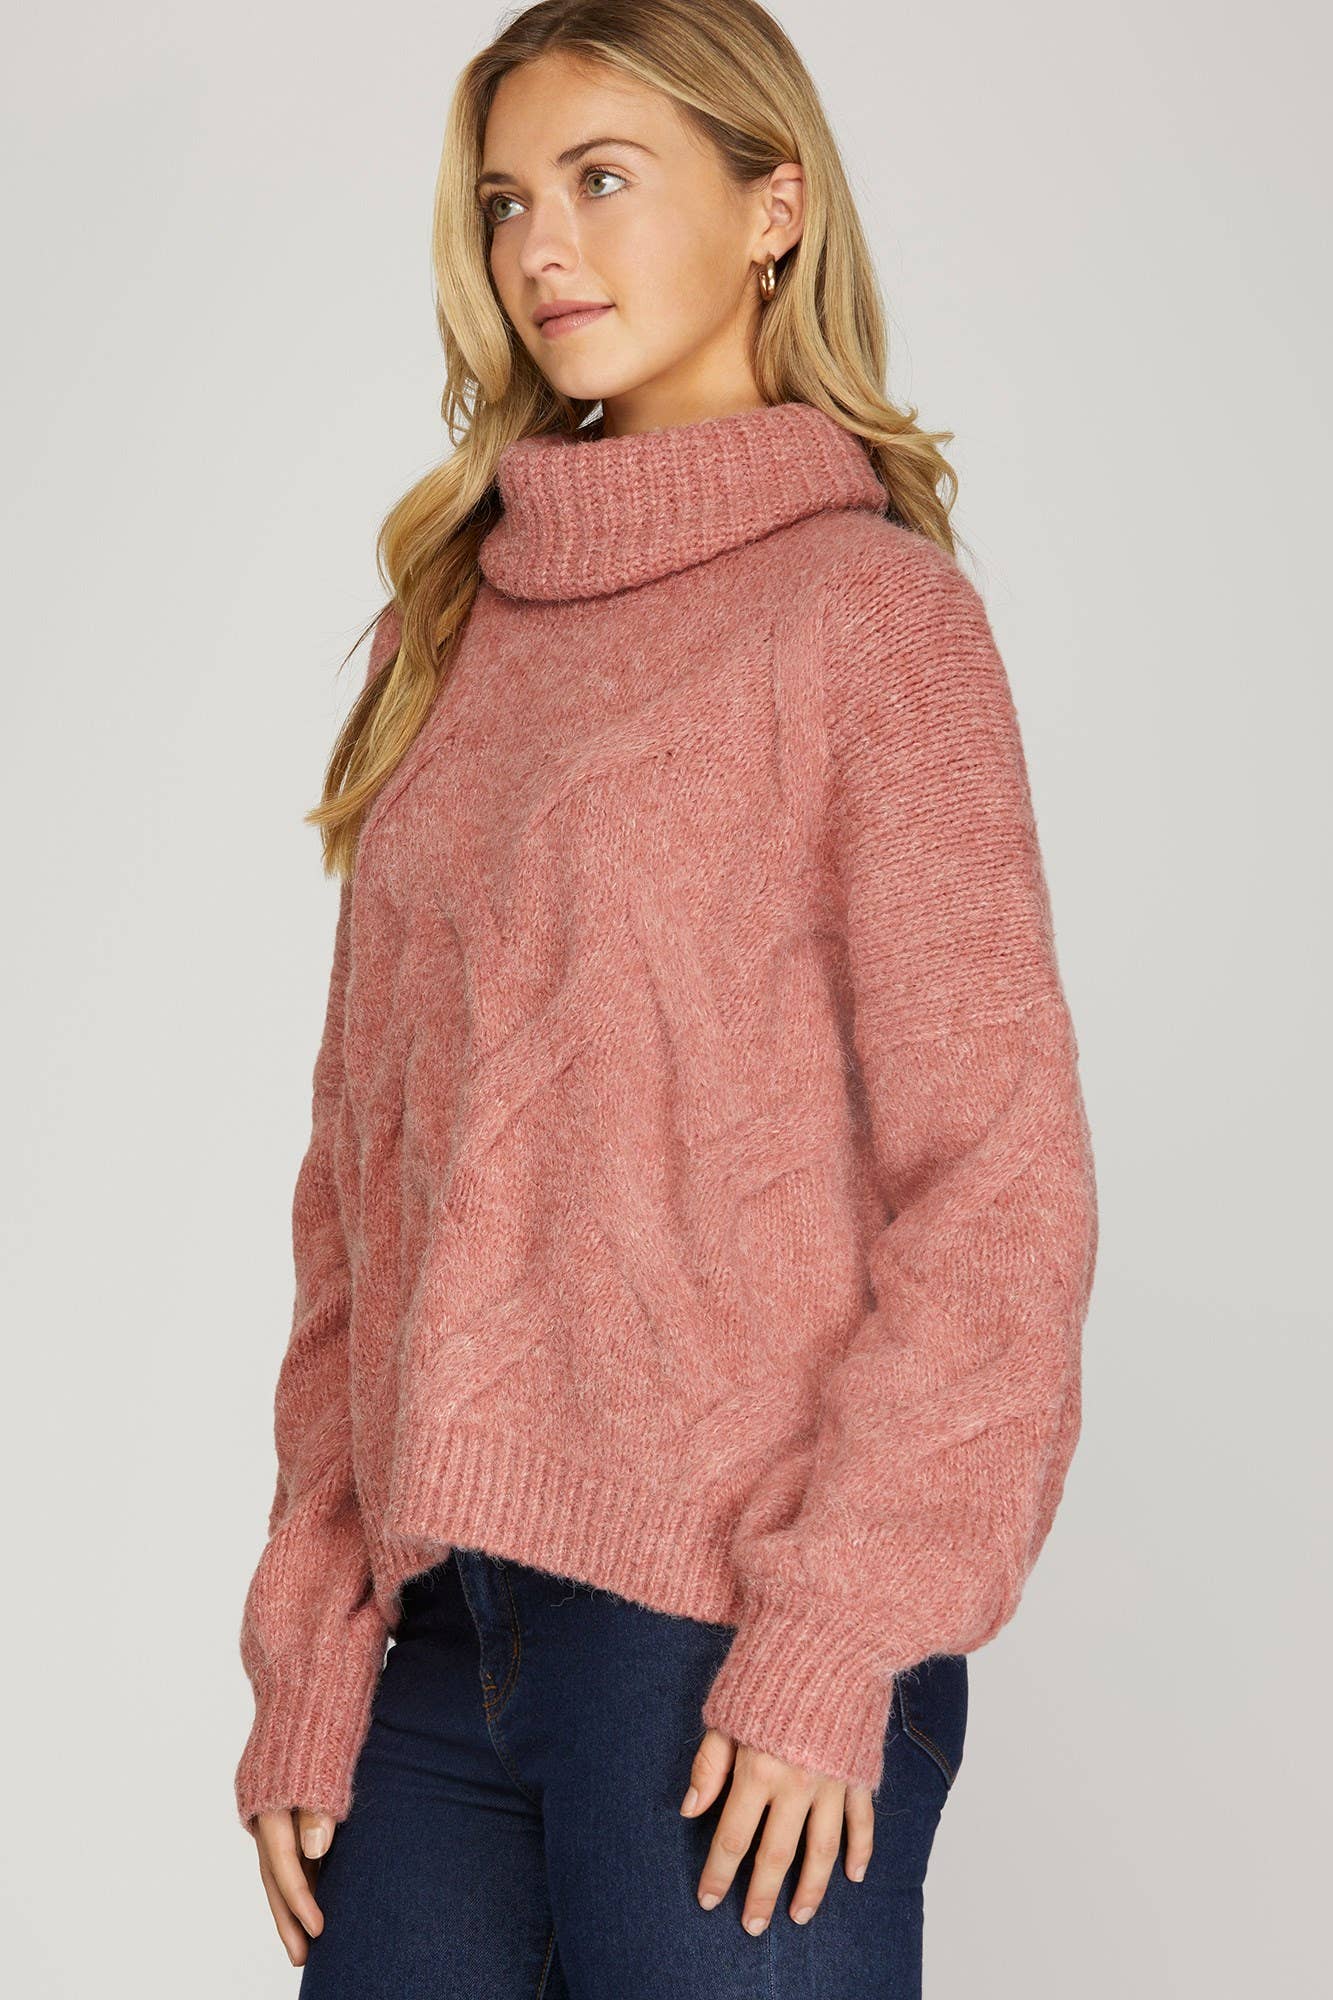 LONG SLEEVE TURTLENECK CABLE KNIT SWEATER TOP: S / CREAM